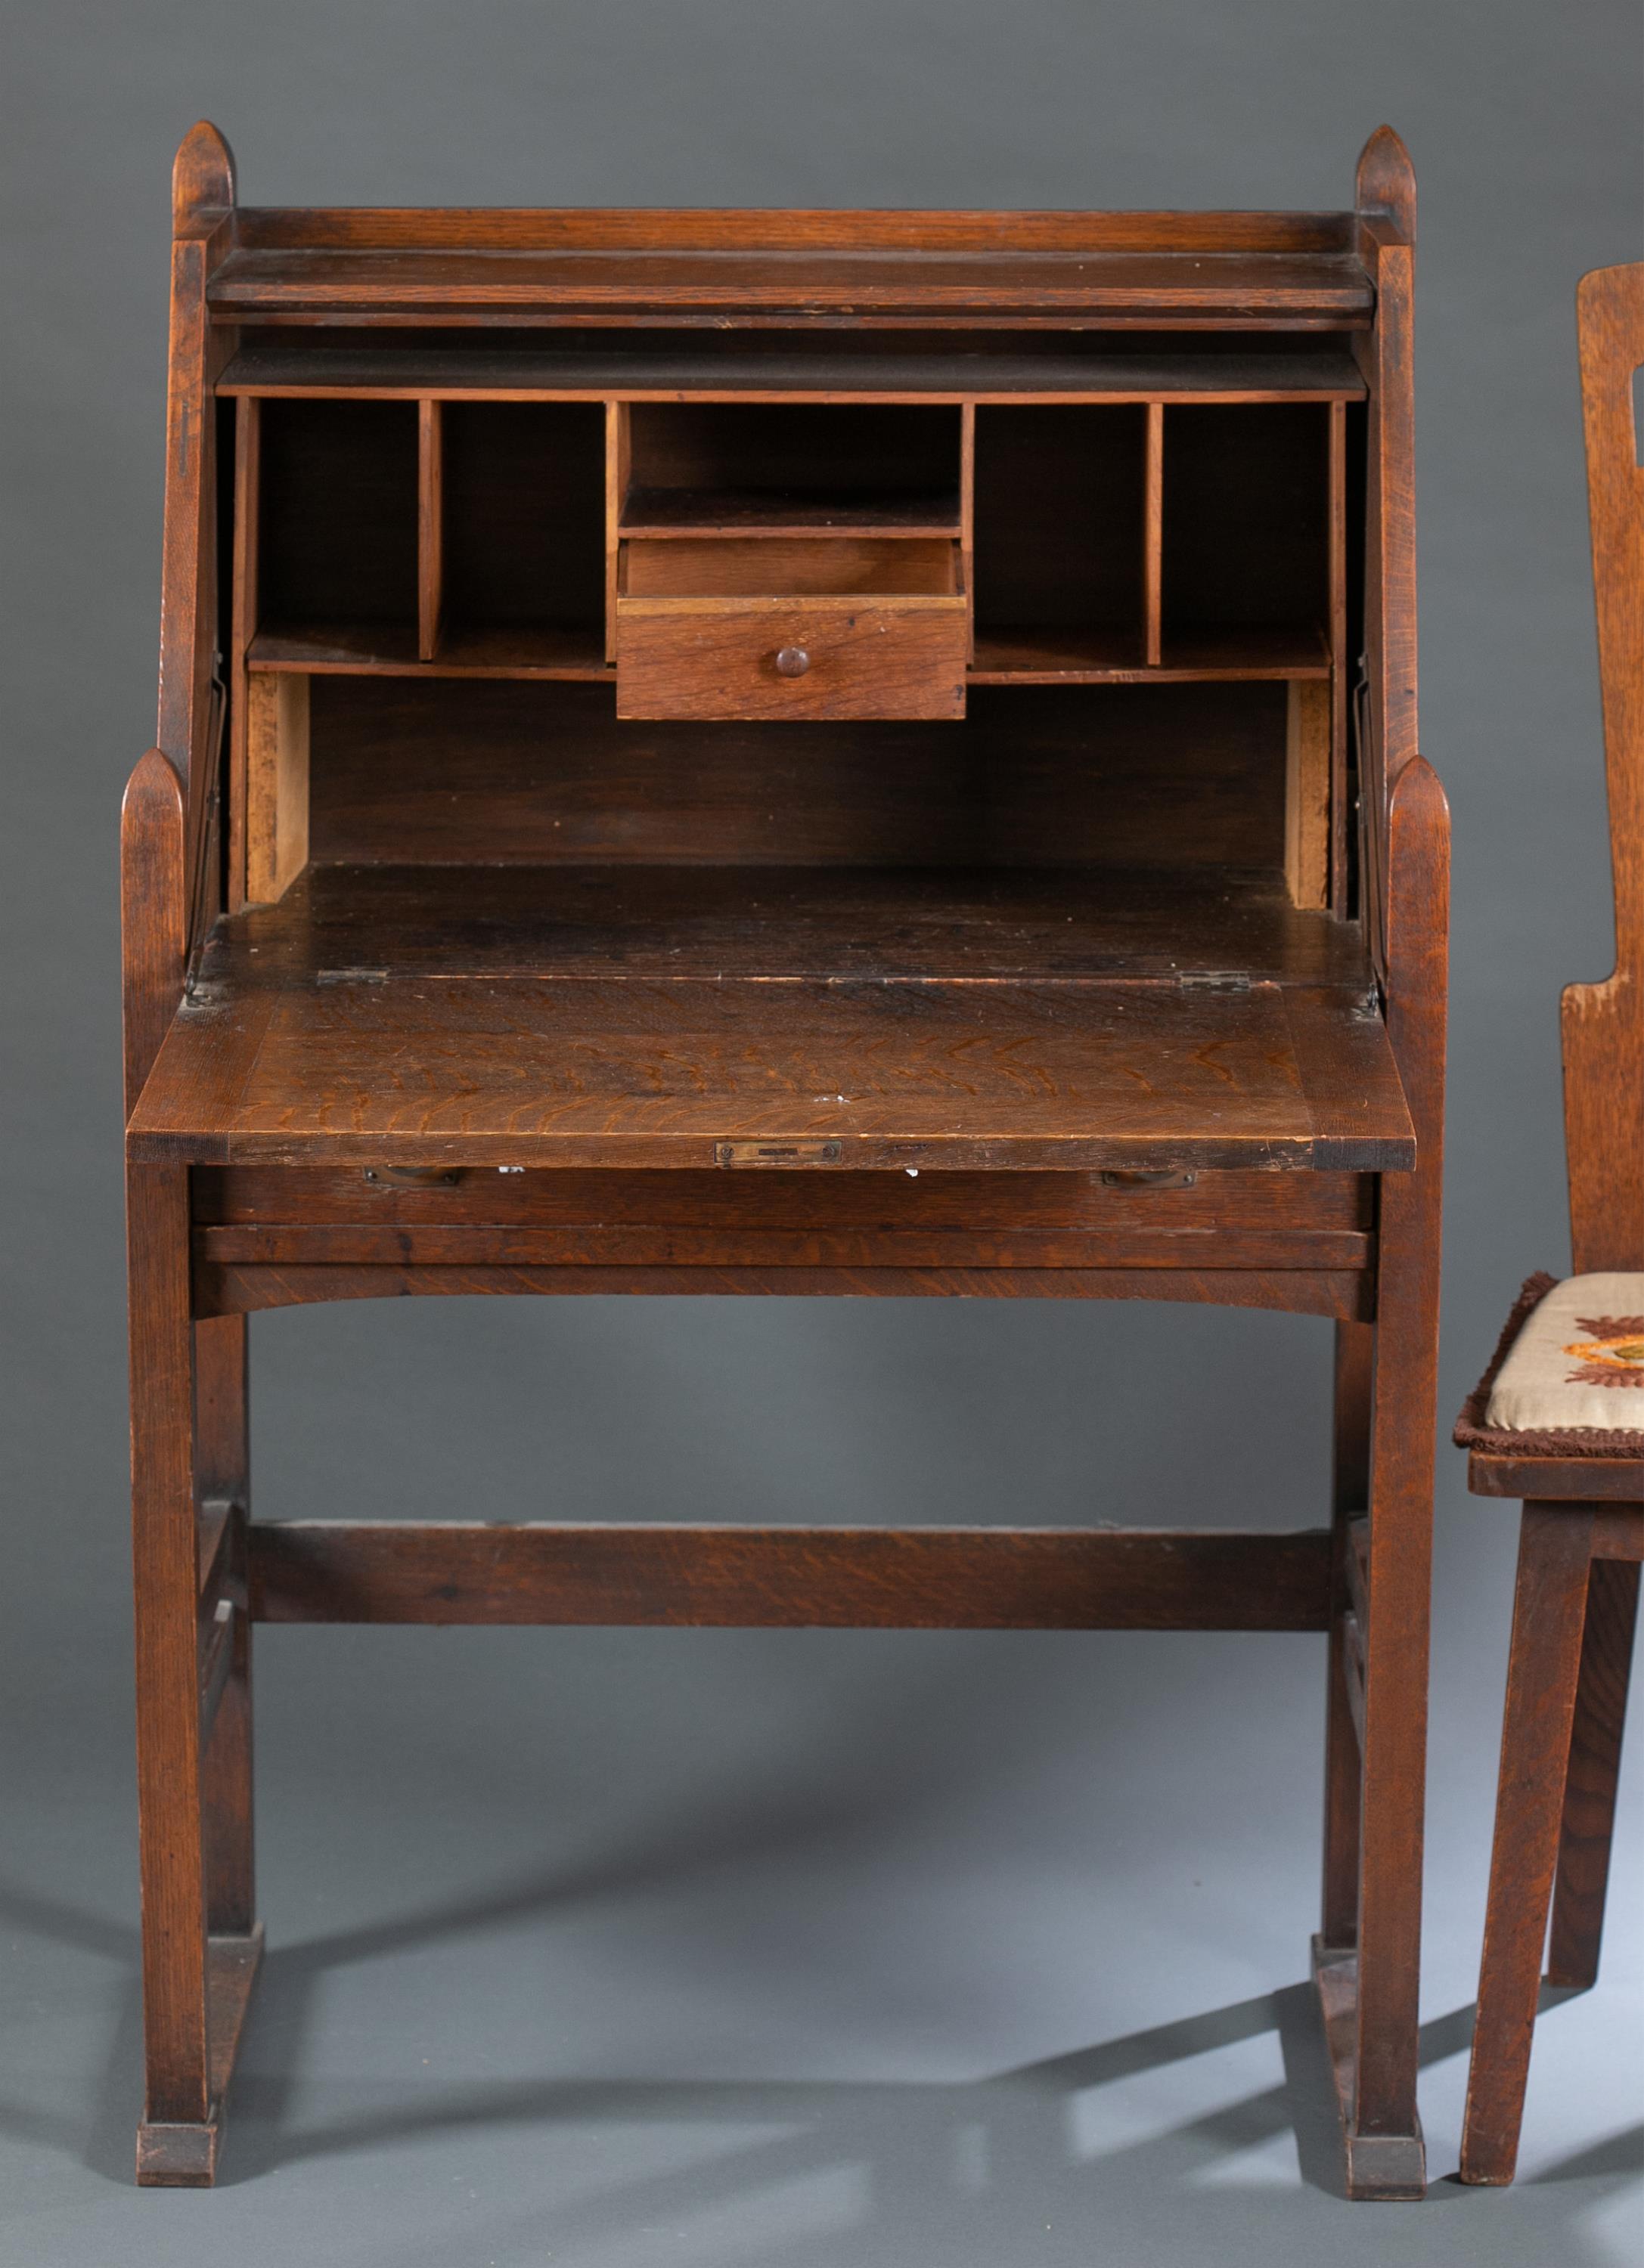 American Arts & Crafts Stickley Bros desk & chair - Image 4 of 8